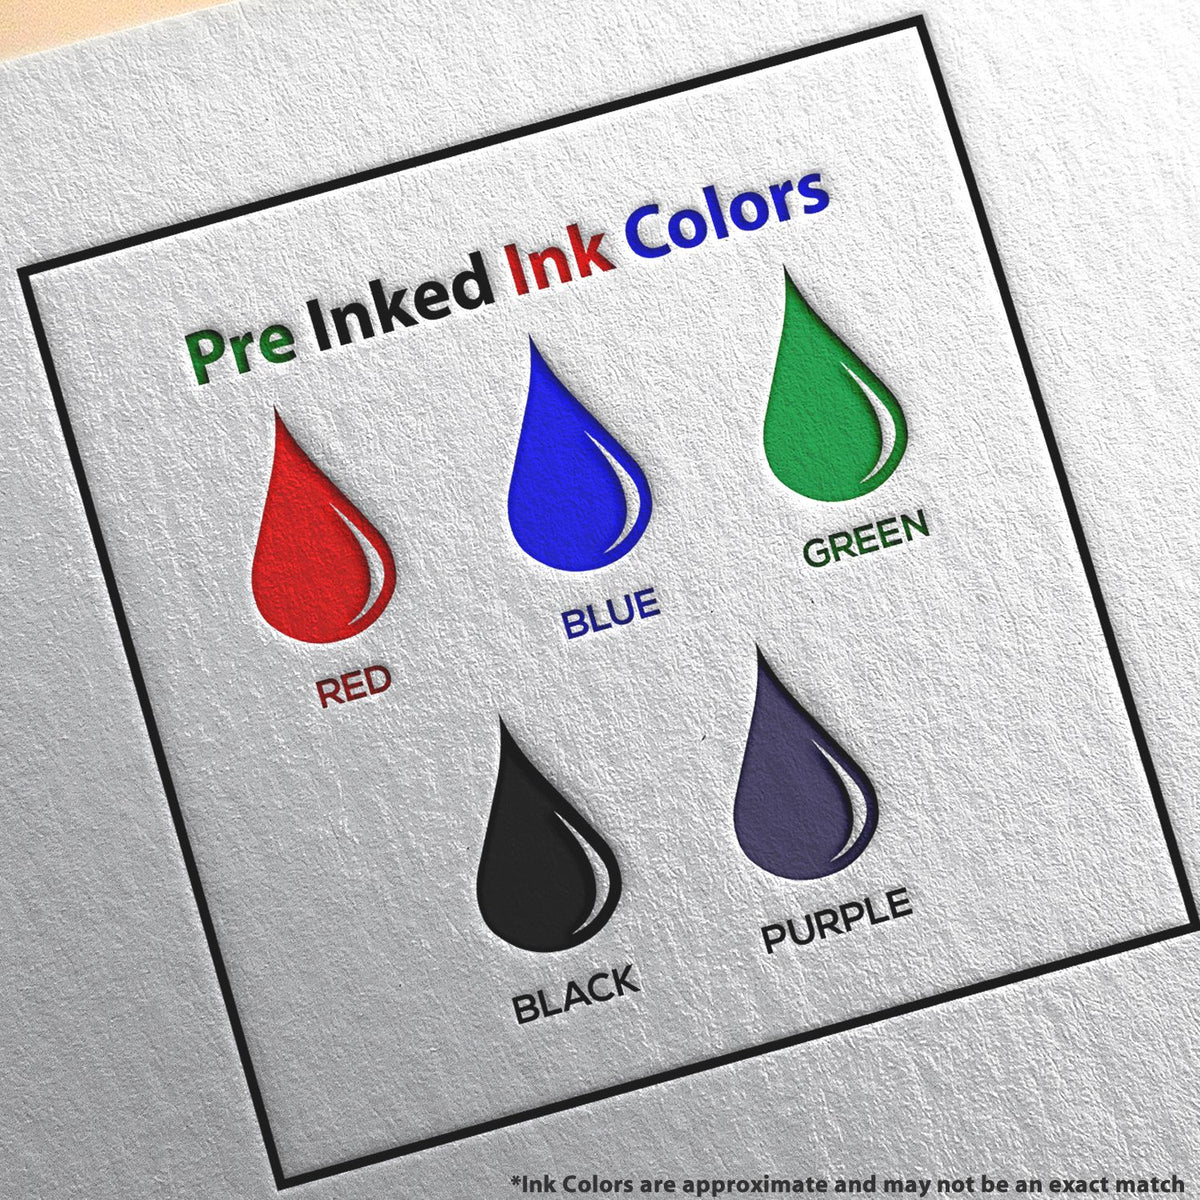 A picture showing the different ink colors or hues available for the Slim Pre-Inked Texas Professional Engineer Seal Stamp product.